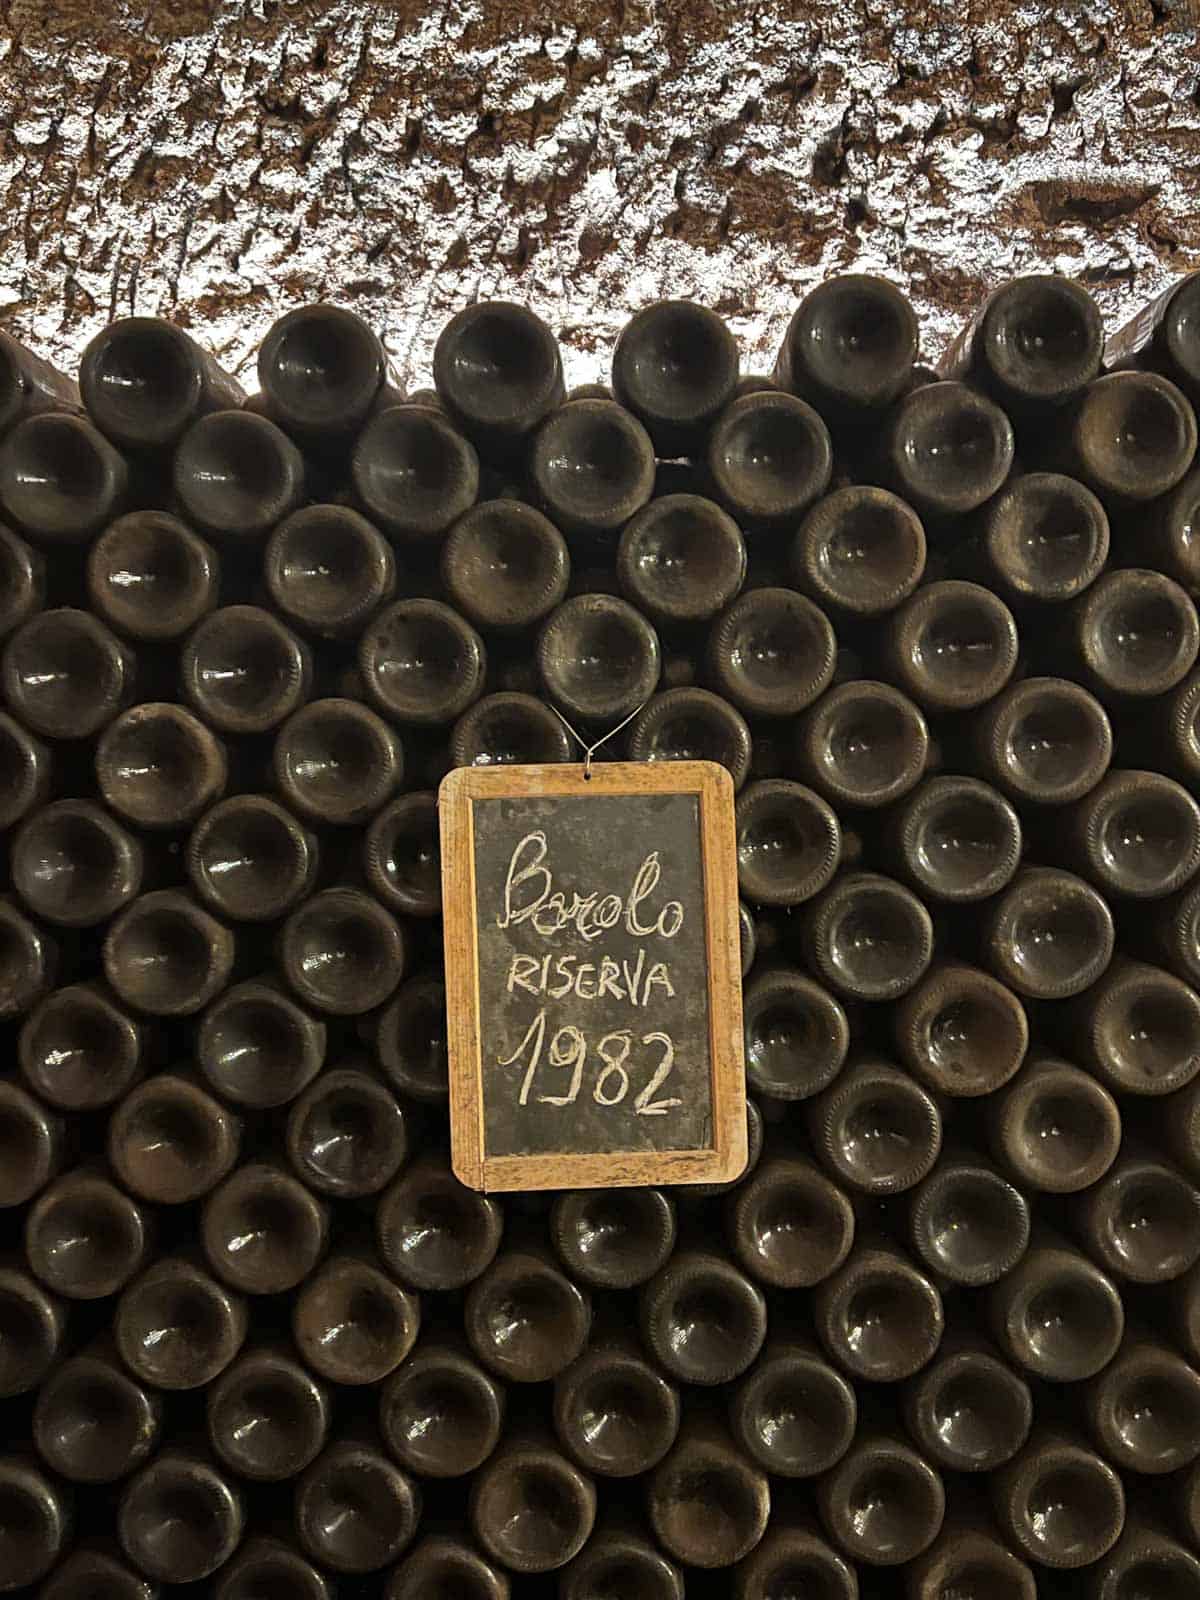 barolo wines piled up aging